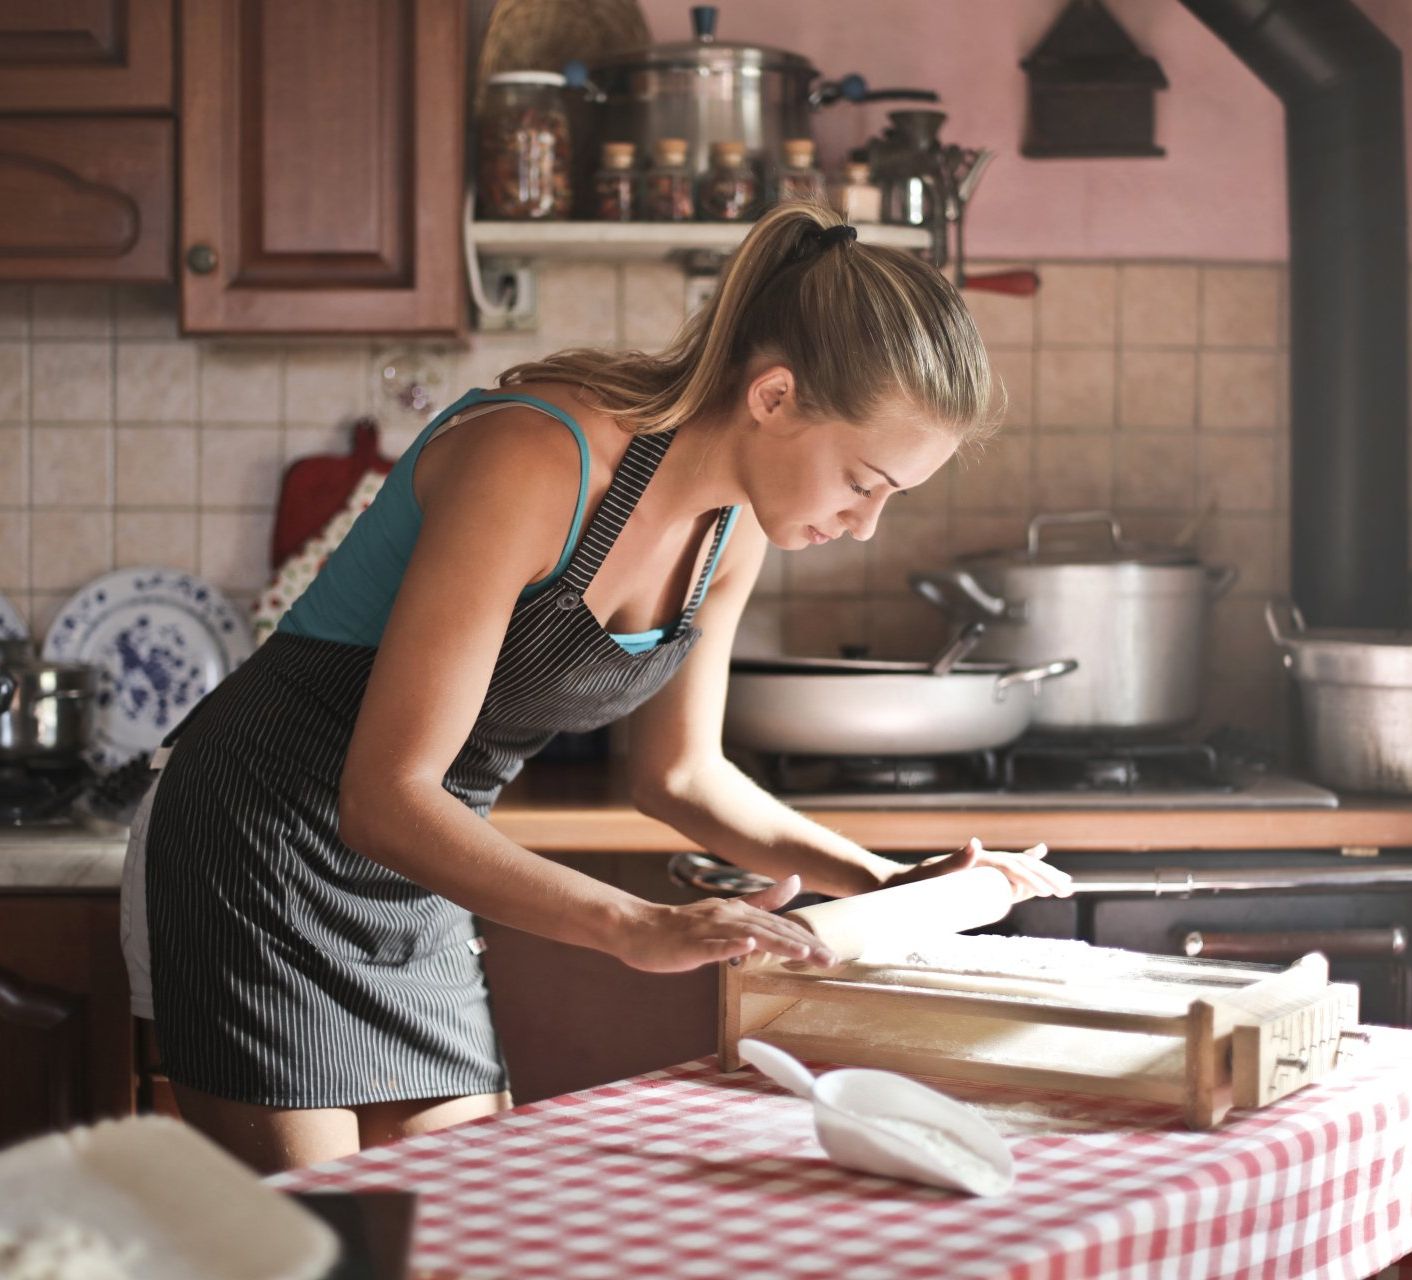 a woman in an apron is working in a kitchen
